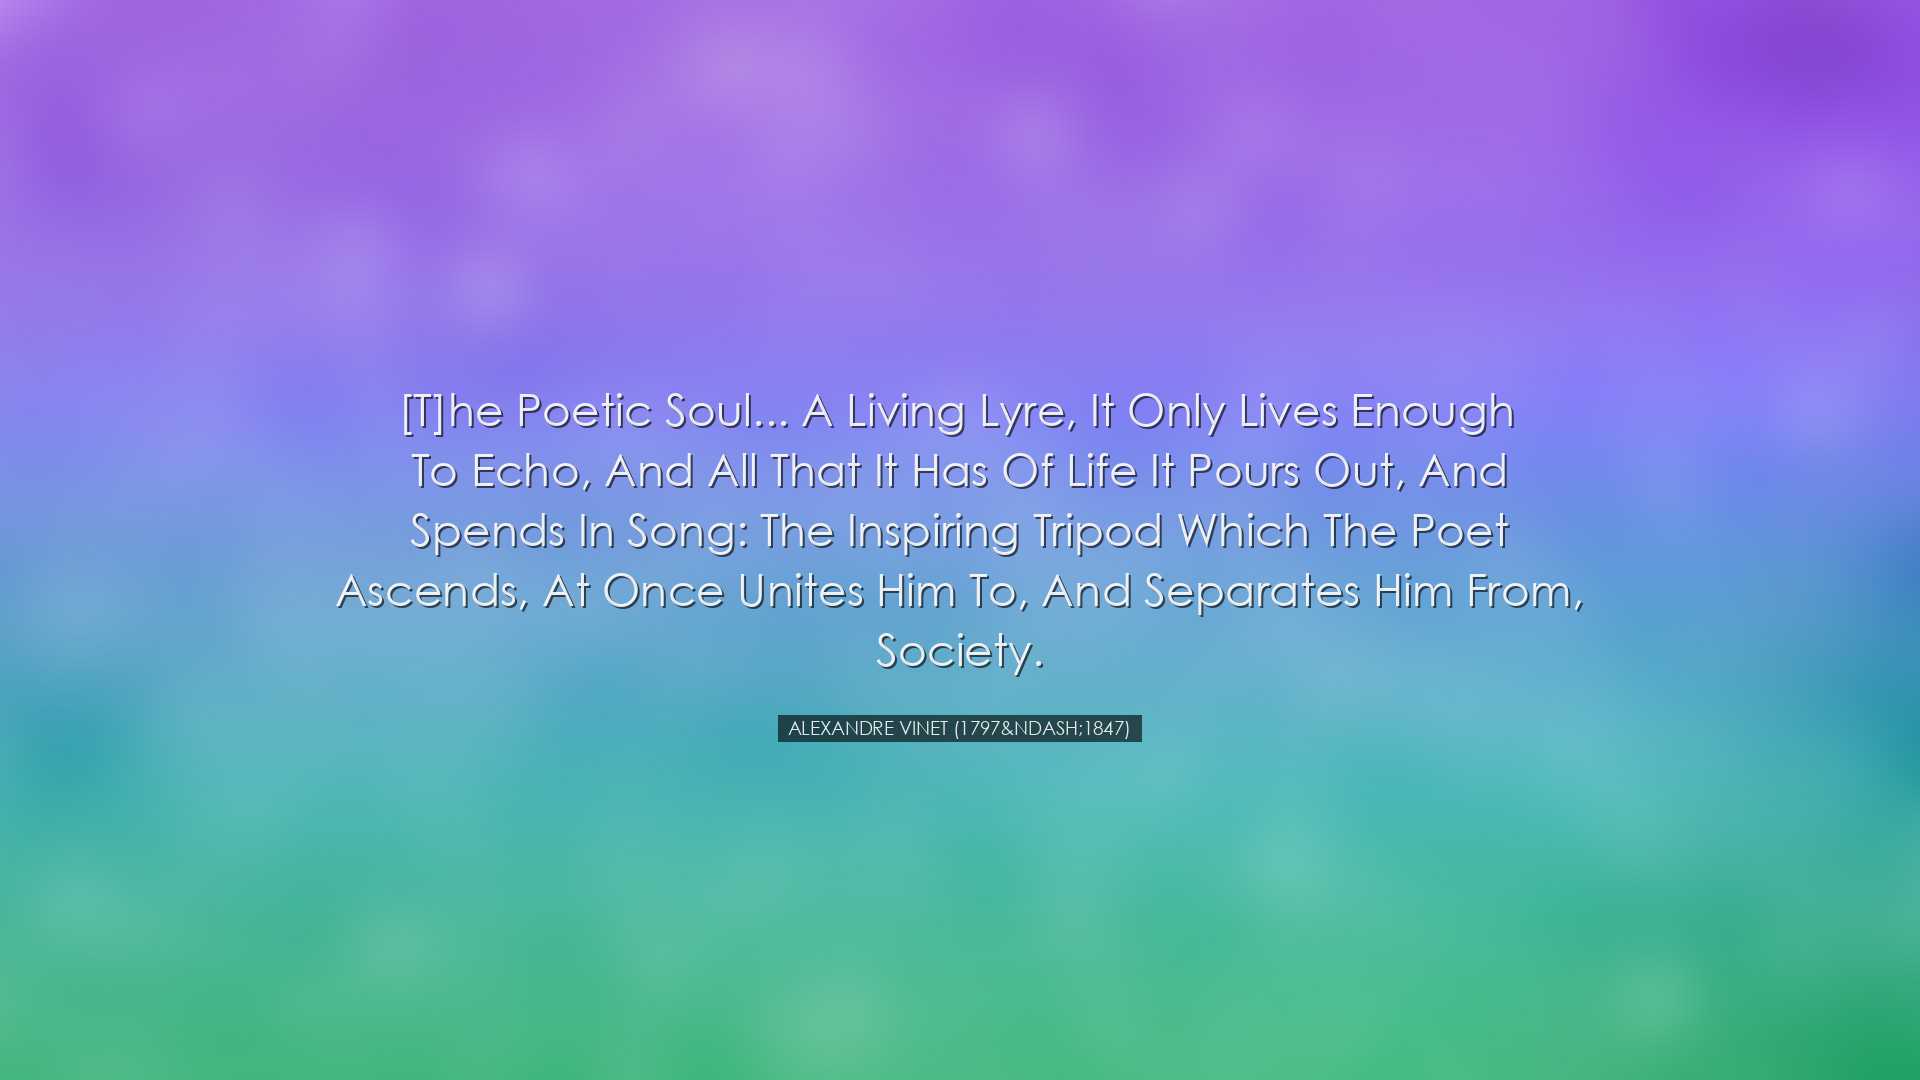 [T]he poetic soul... a living lyre, it only lives enough to echo,